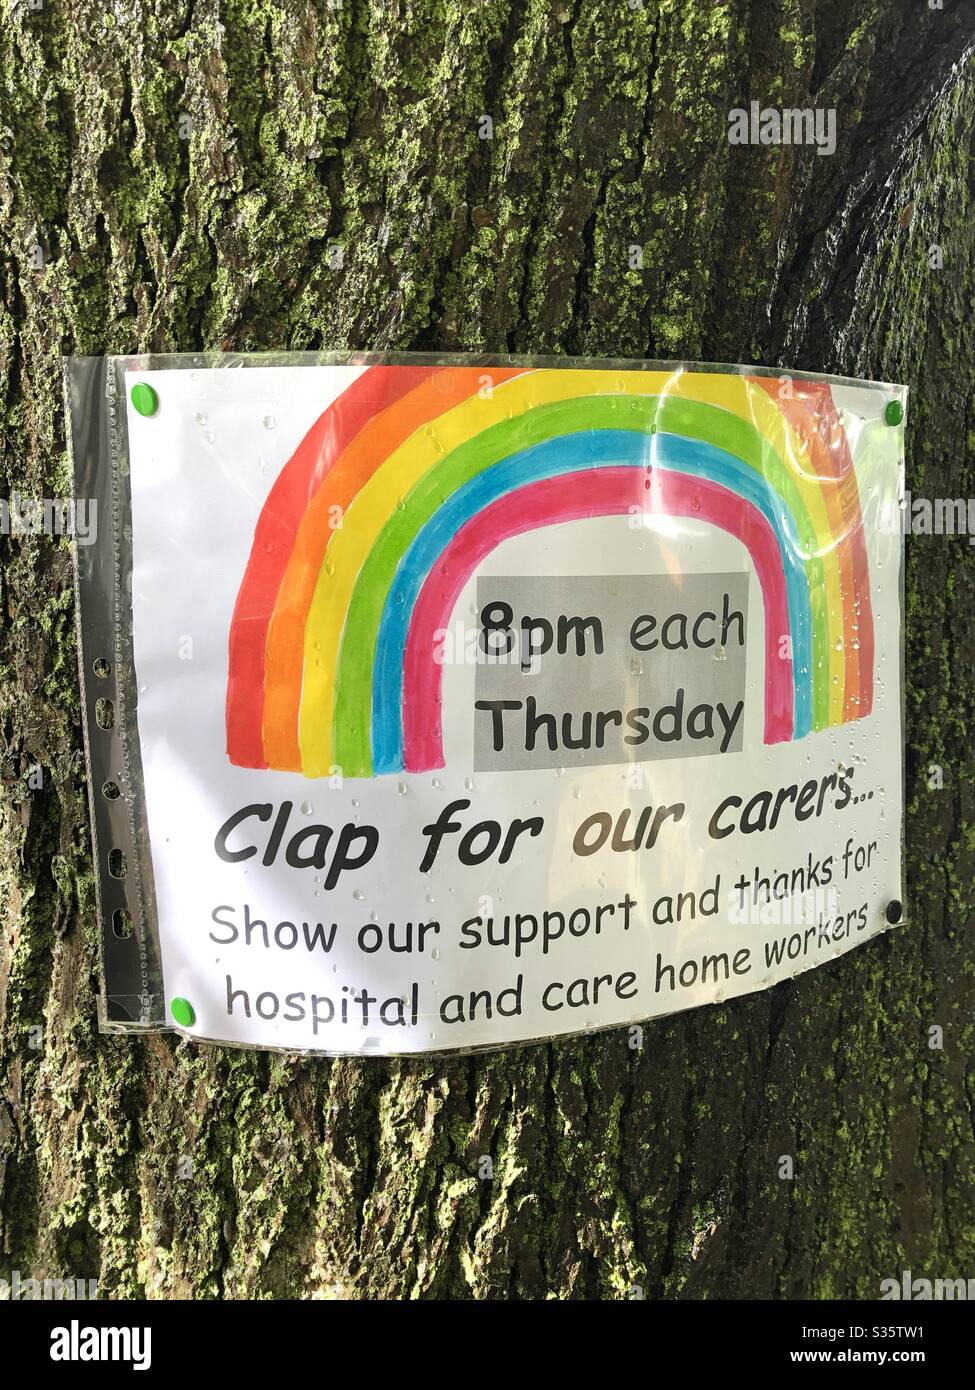 Clap for our carers sign Stock Photo